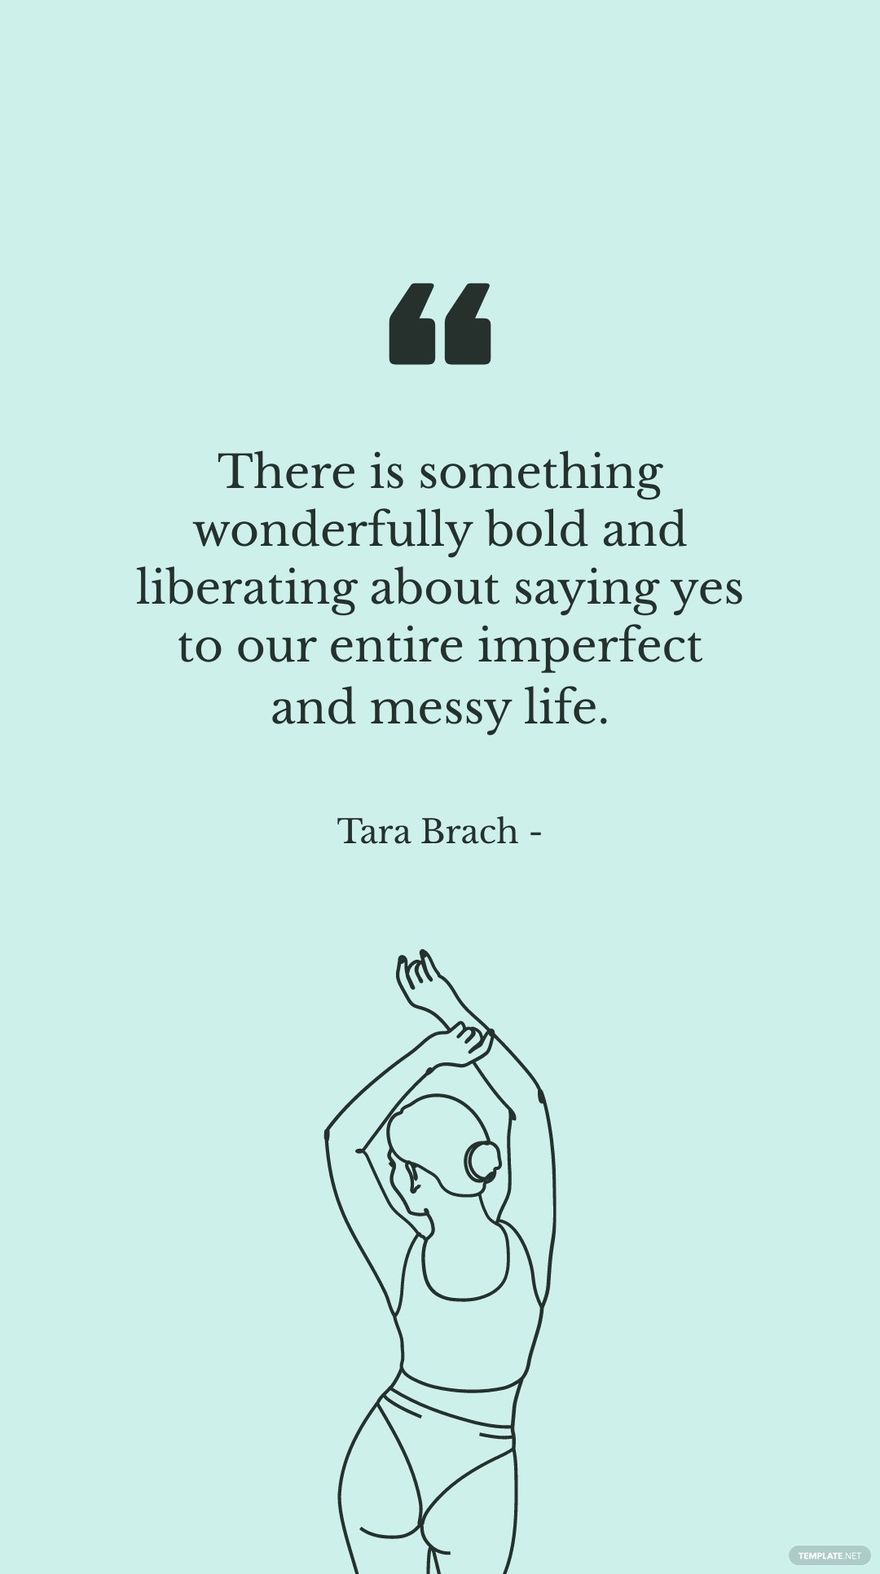 Free Tara Brach - There is something wonderfully bold and liberating about saying yes to our entire imperfect and messy life. in JPG